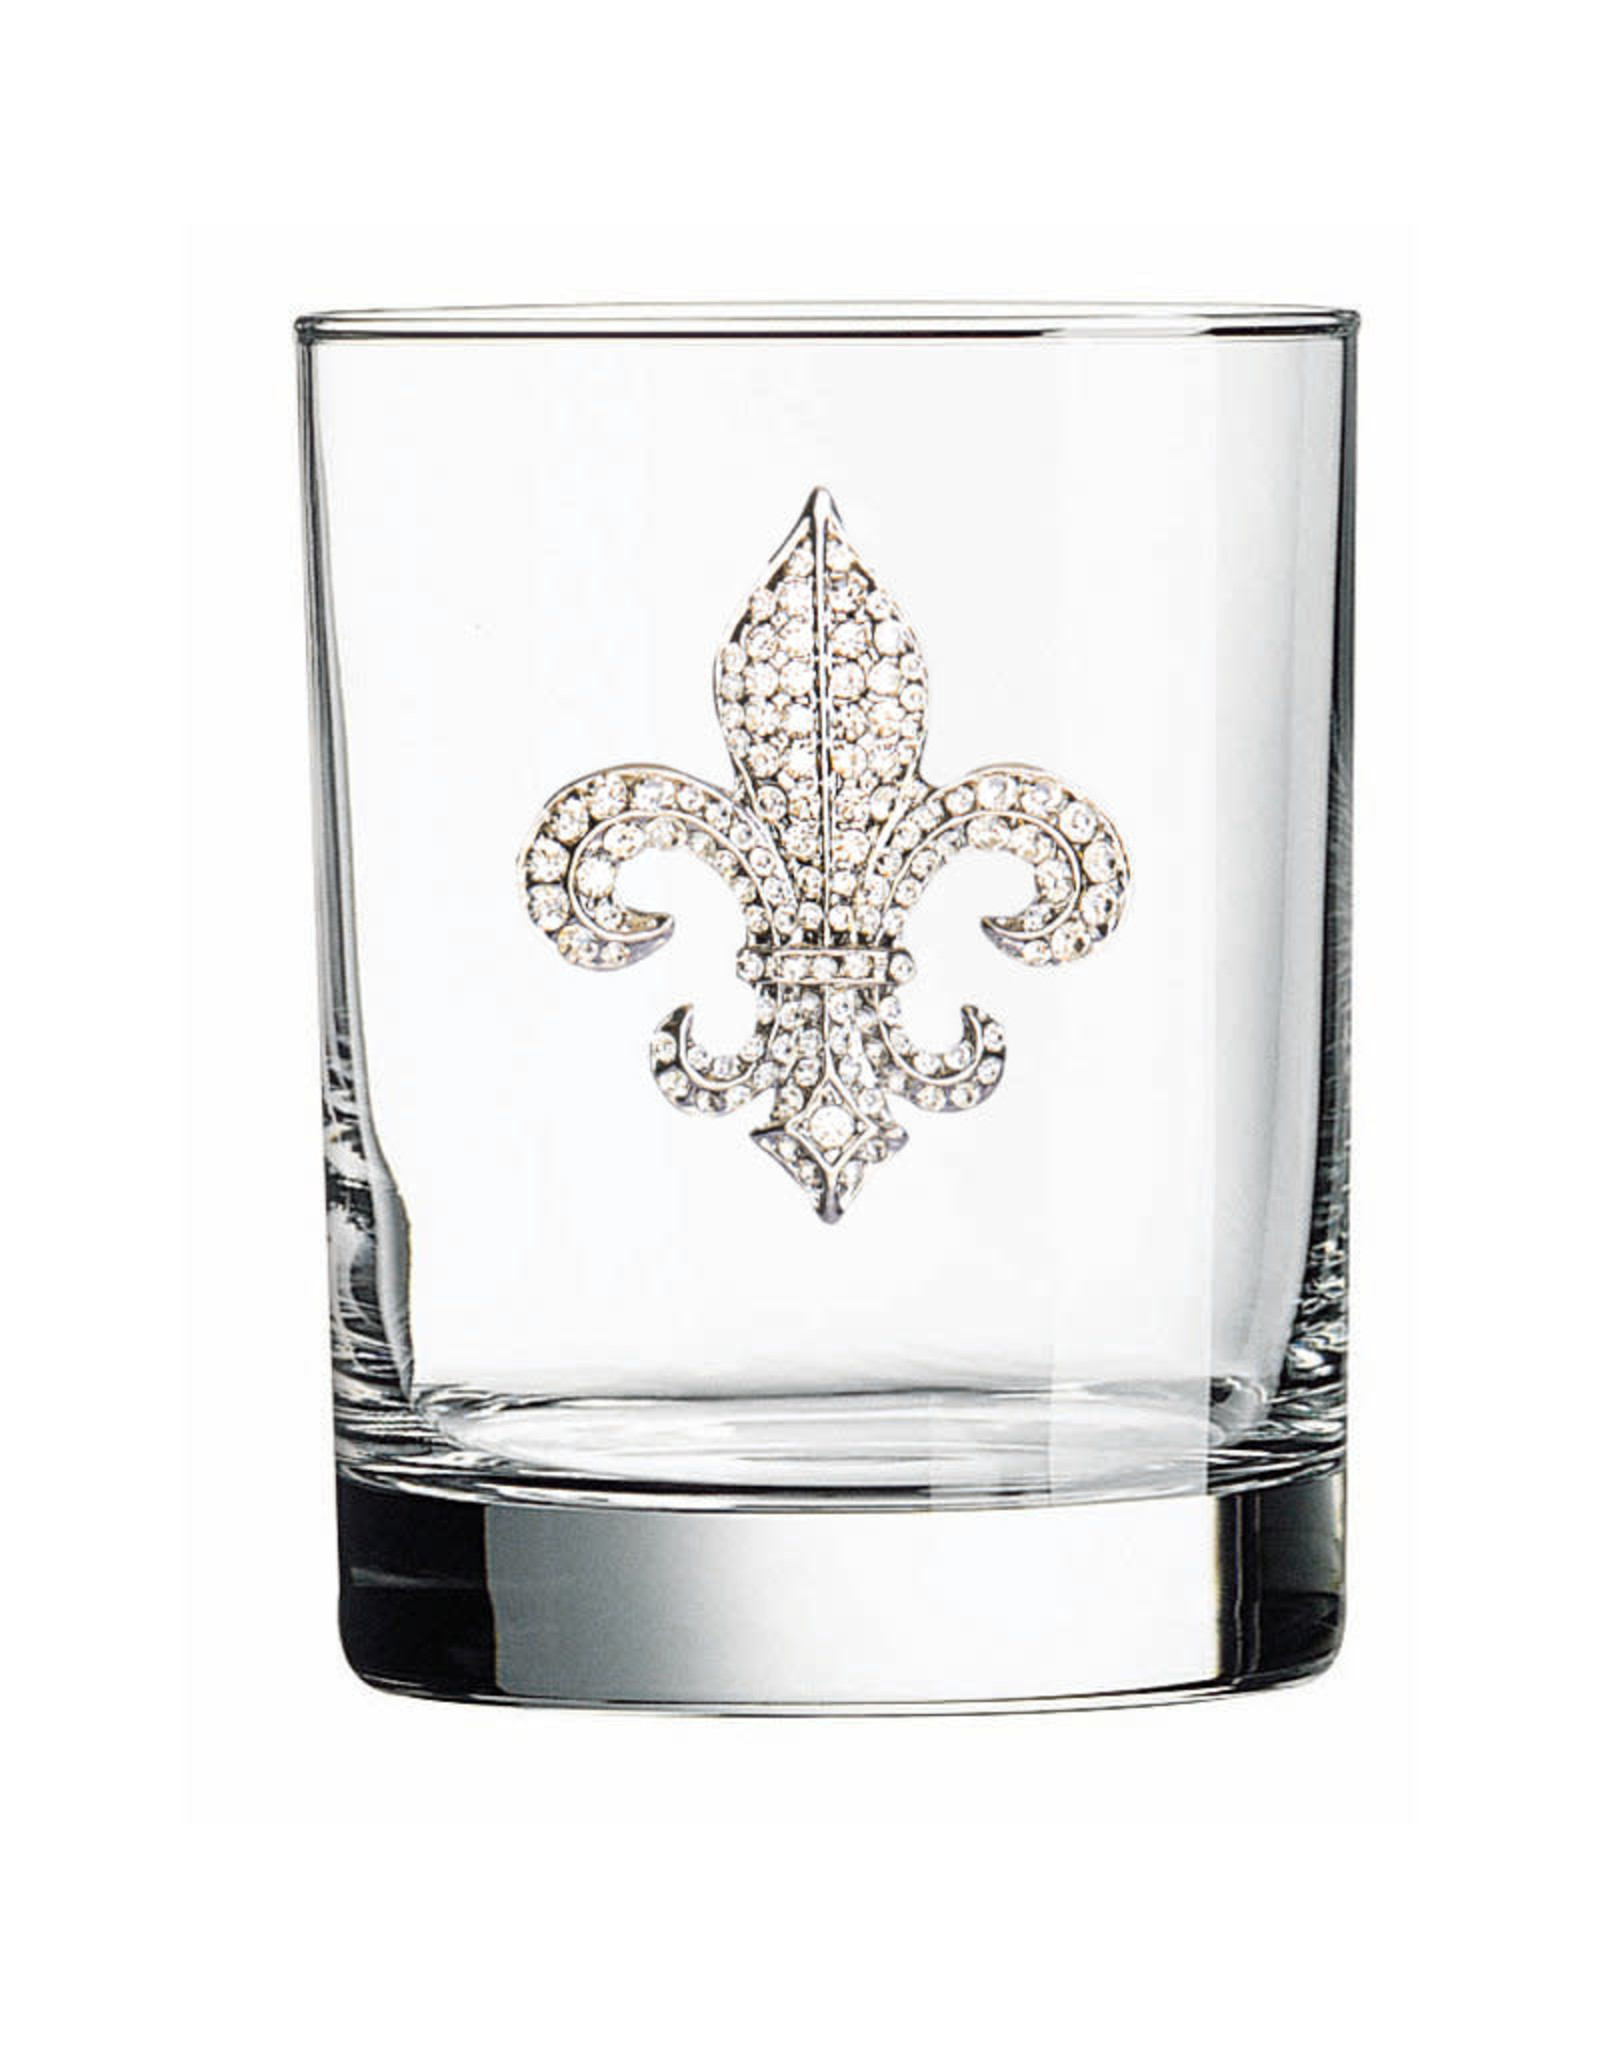 The Queen's Jewels Diamond Fleur de Lis Jeweled Double Old Fashioned